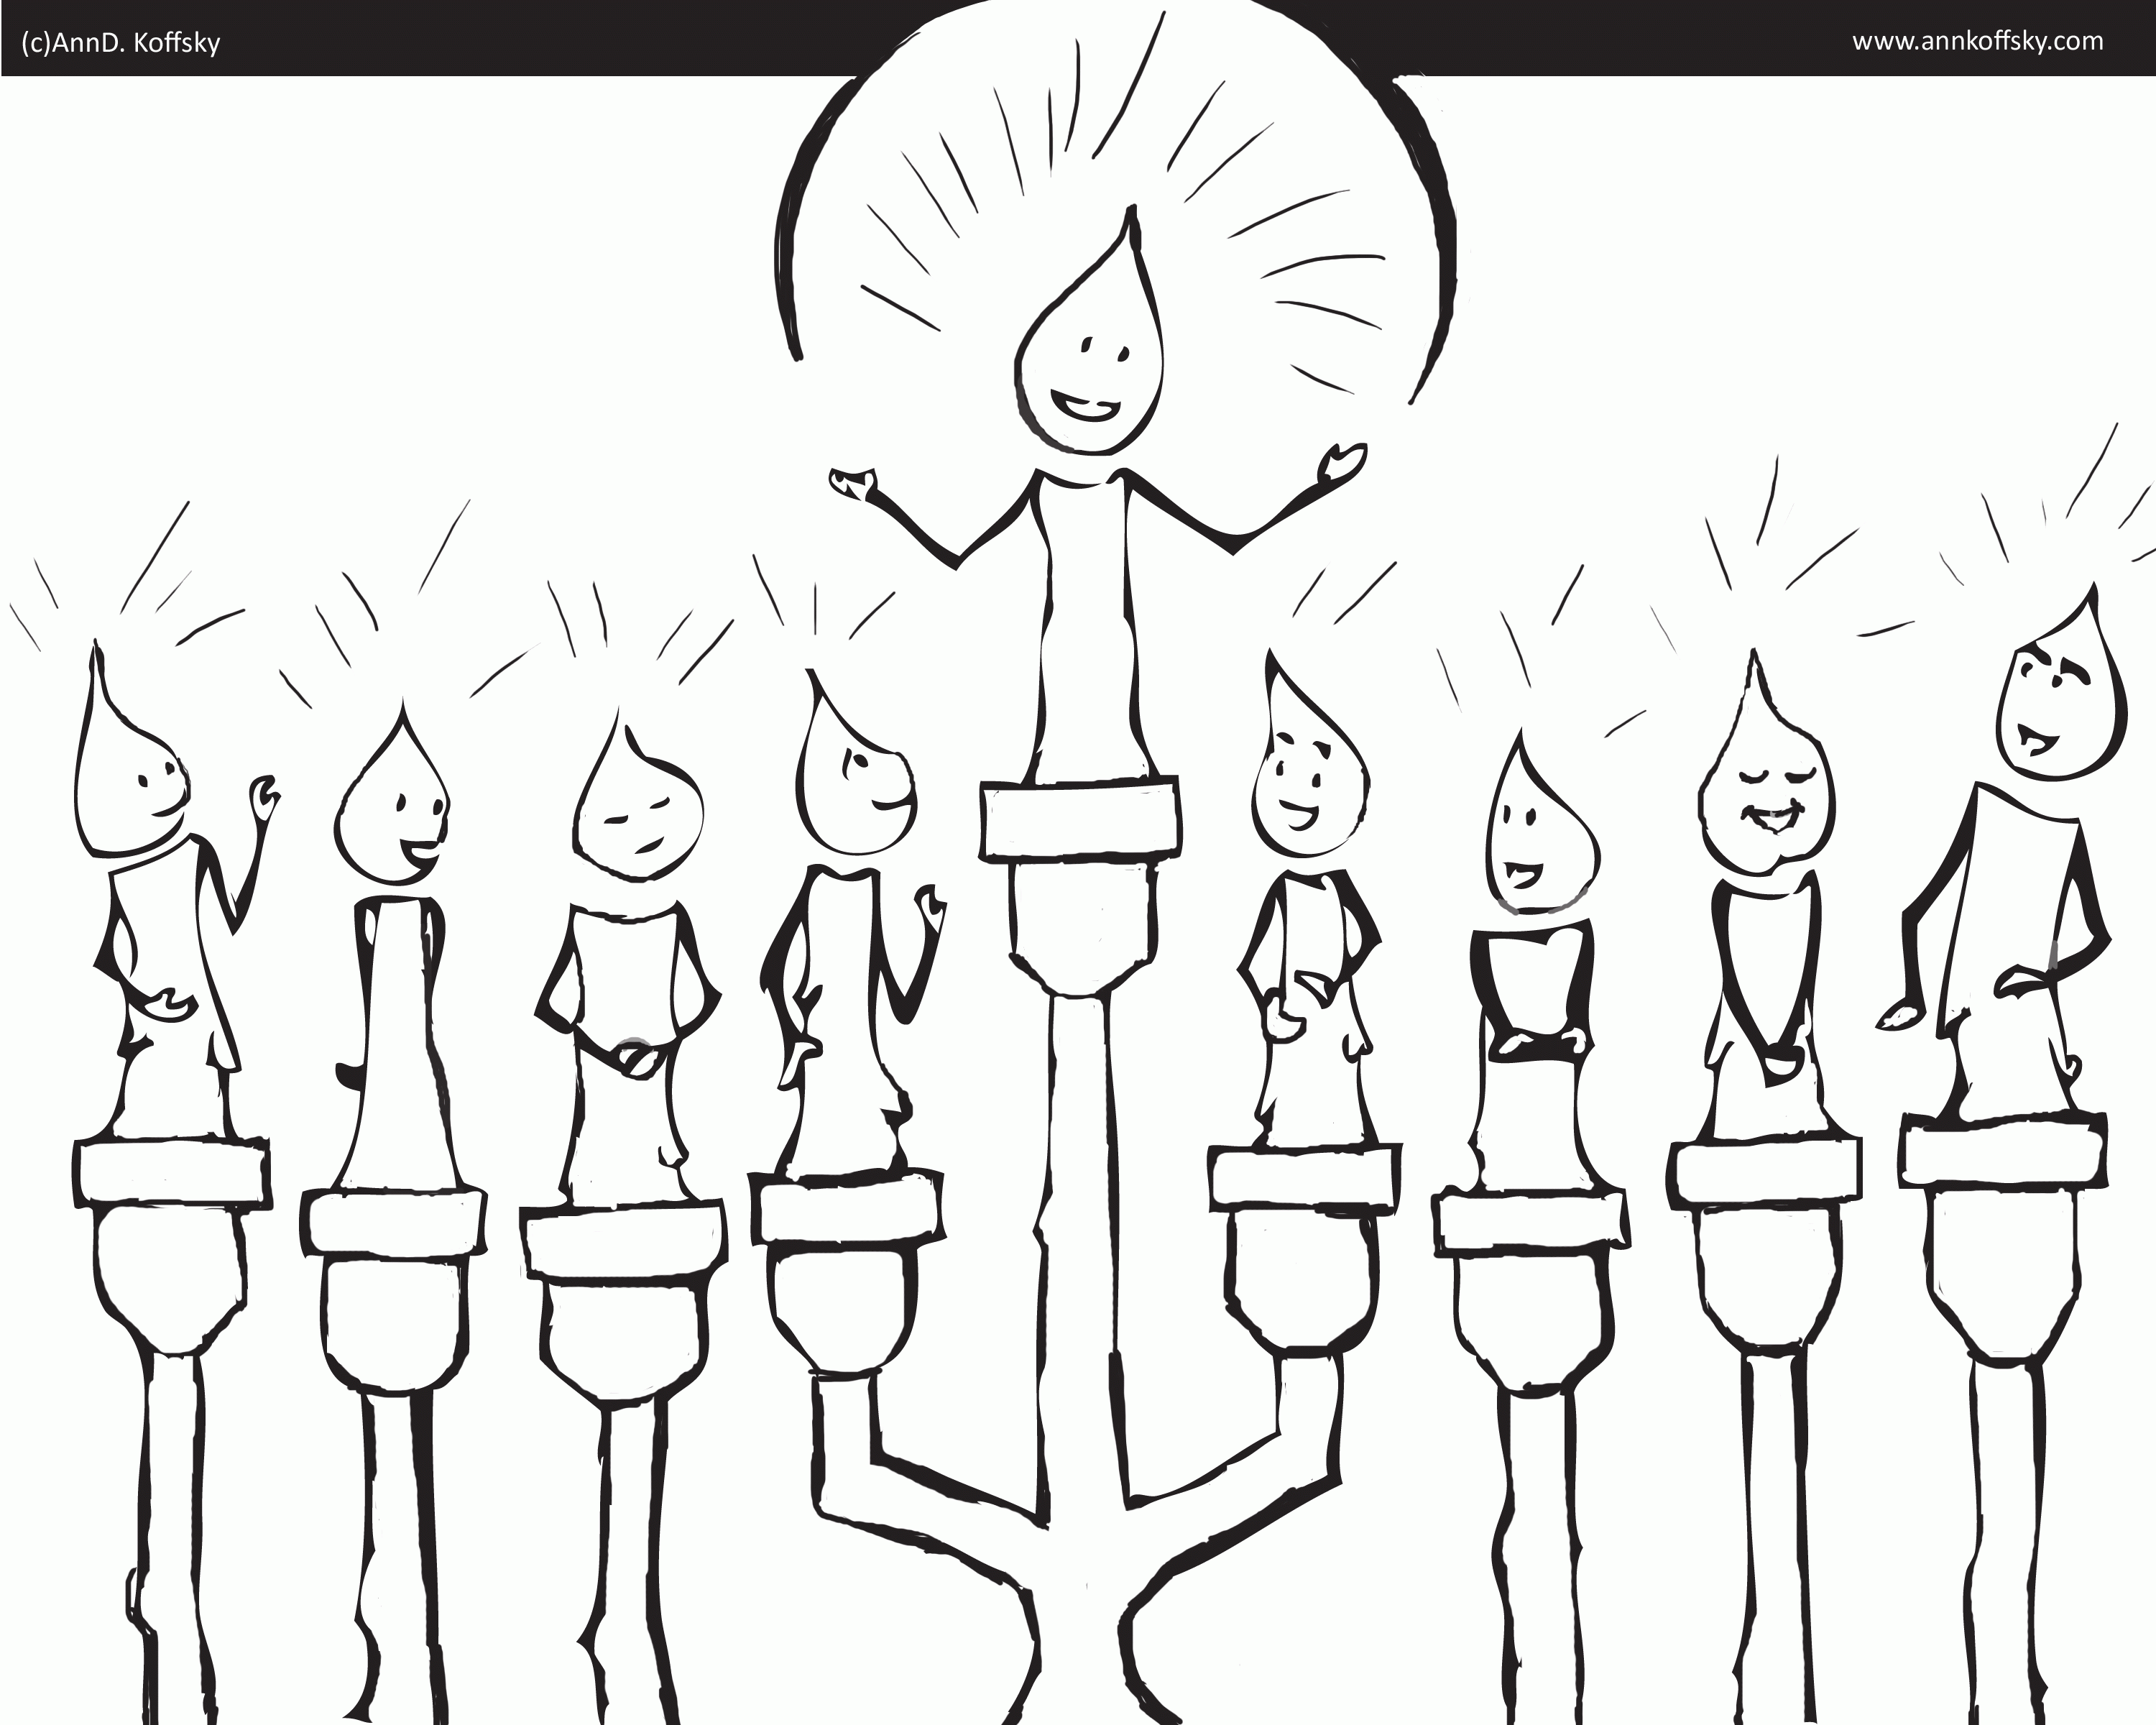 Happy Chanukah! (coloring page)